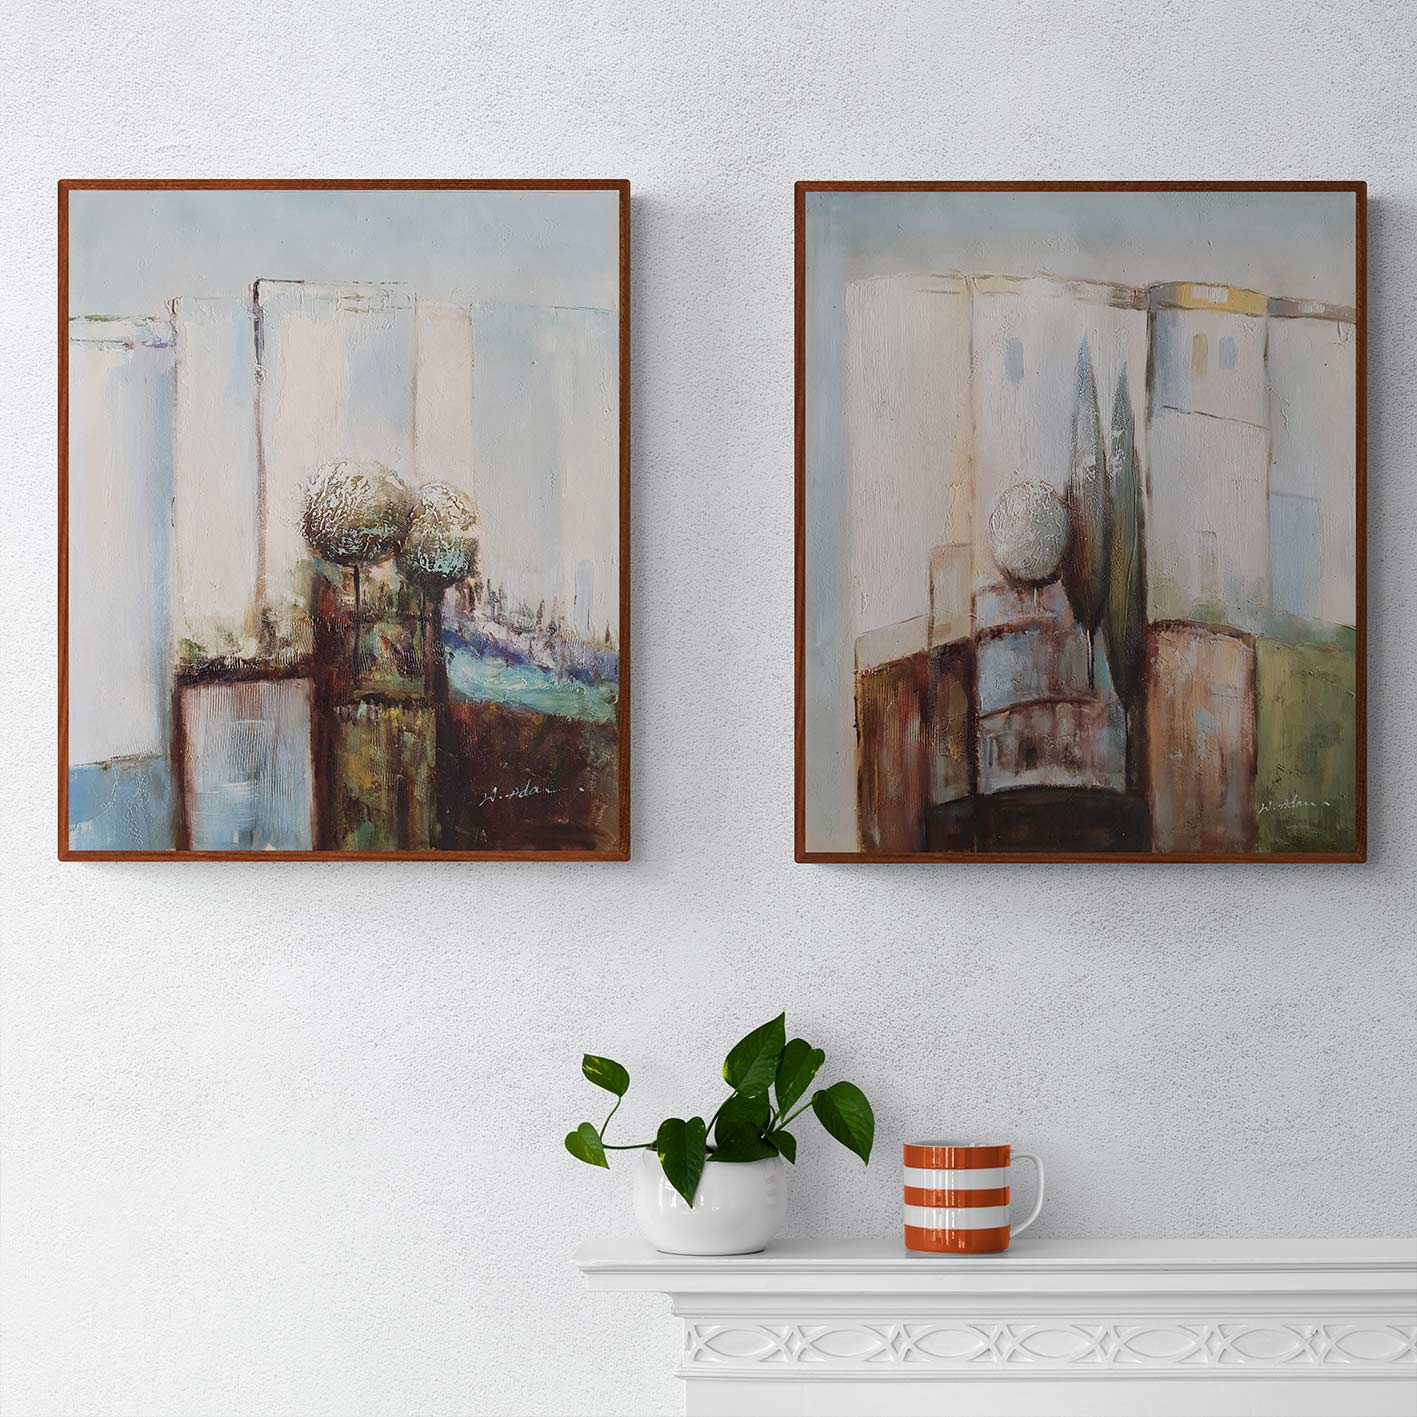 Urban Abstract Diptych Painting 50x60 cm [2 pieces]